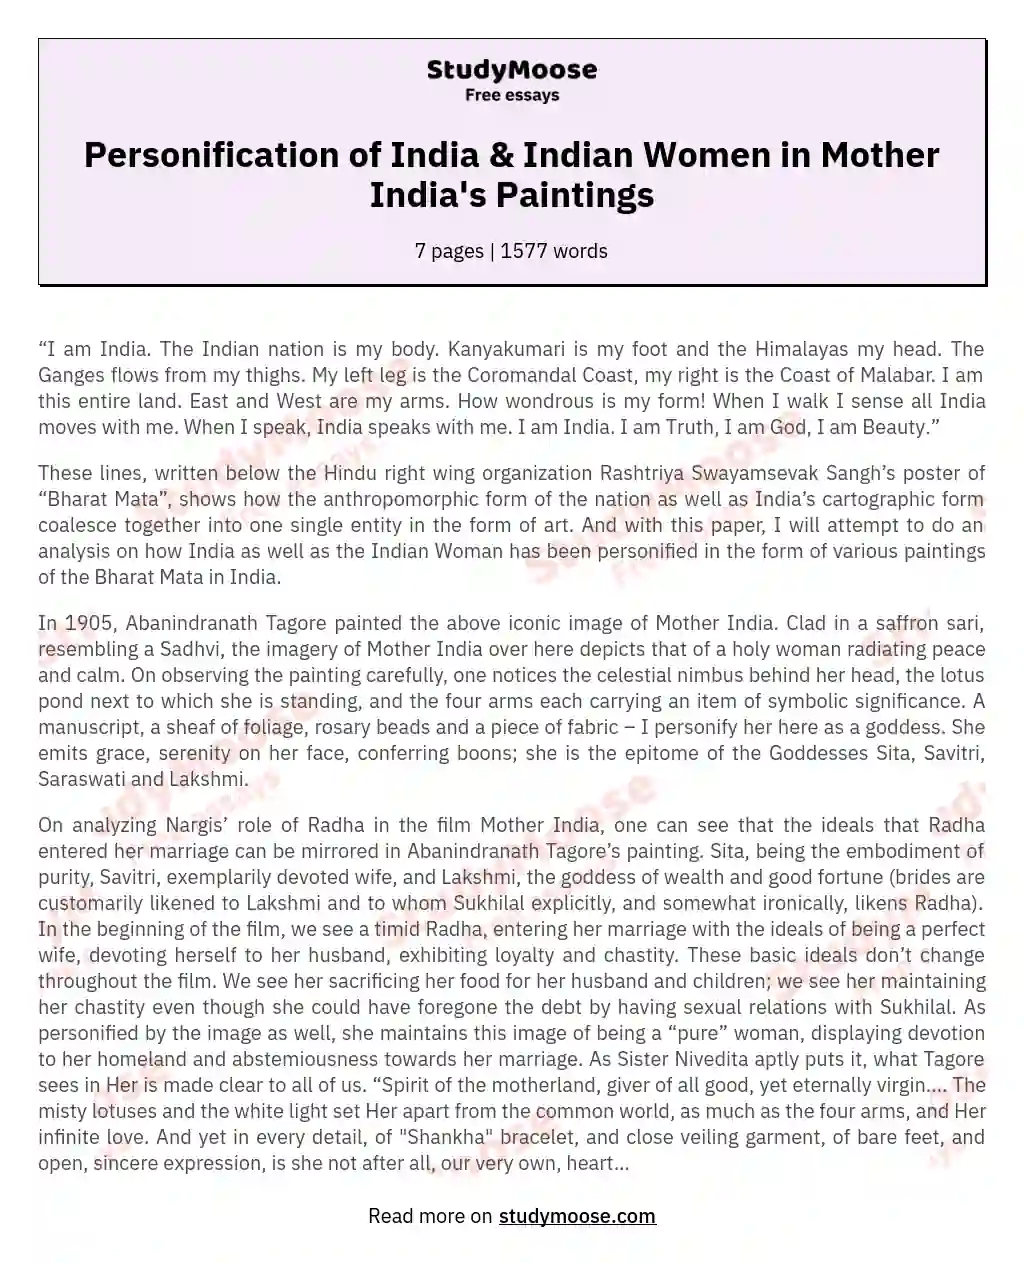 How Has the Personification of India and the Indian Woman Been Reflected in the Various Paintings of Mother India?